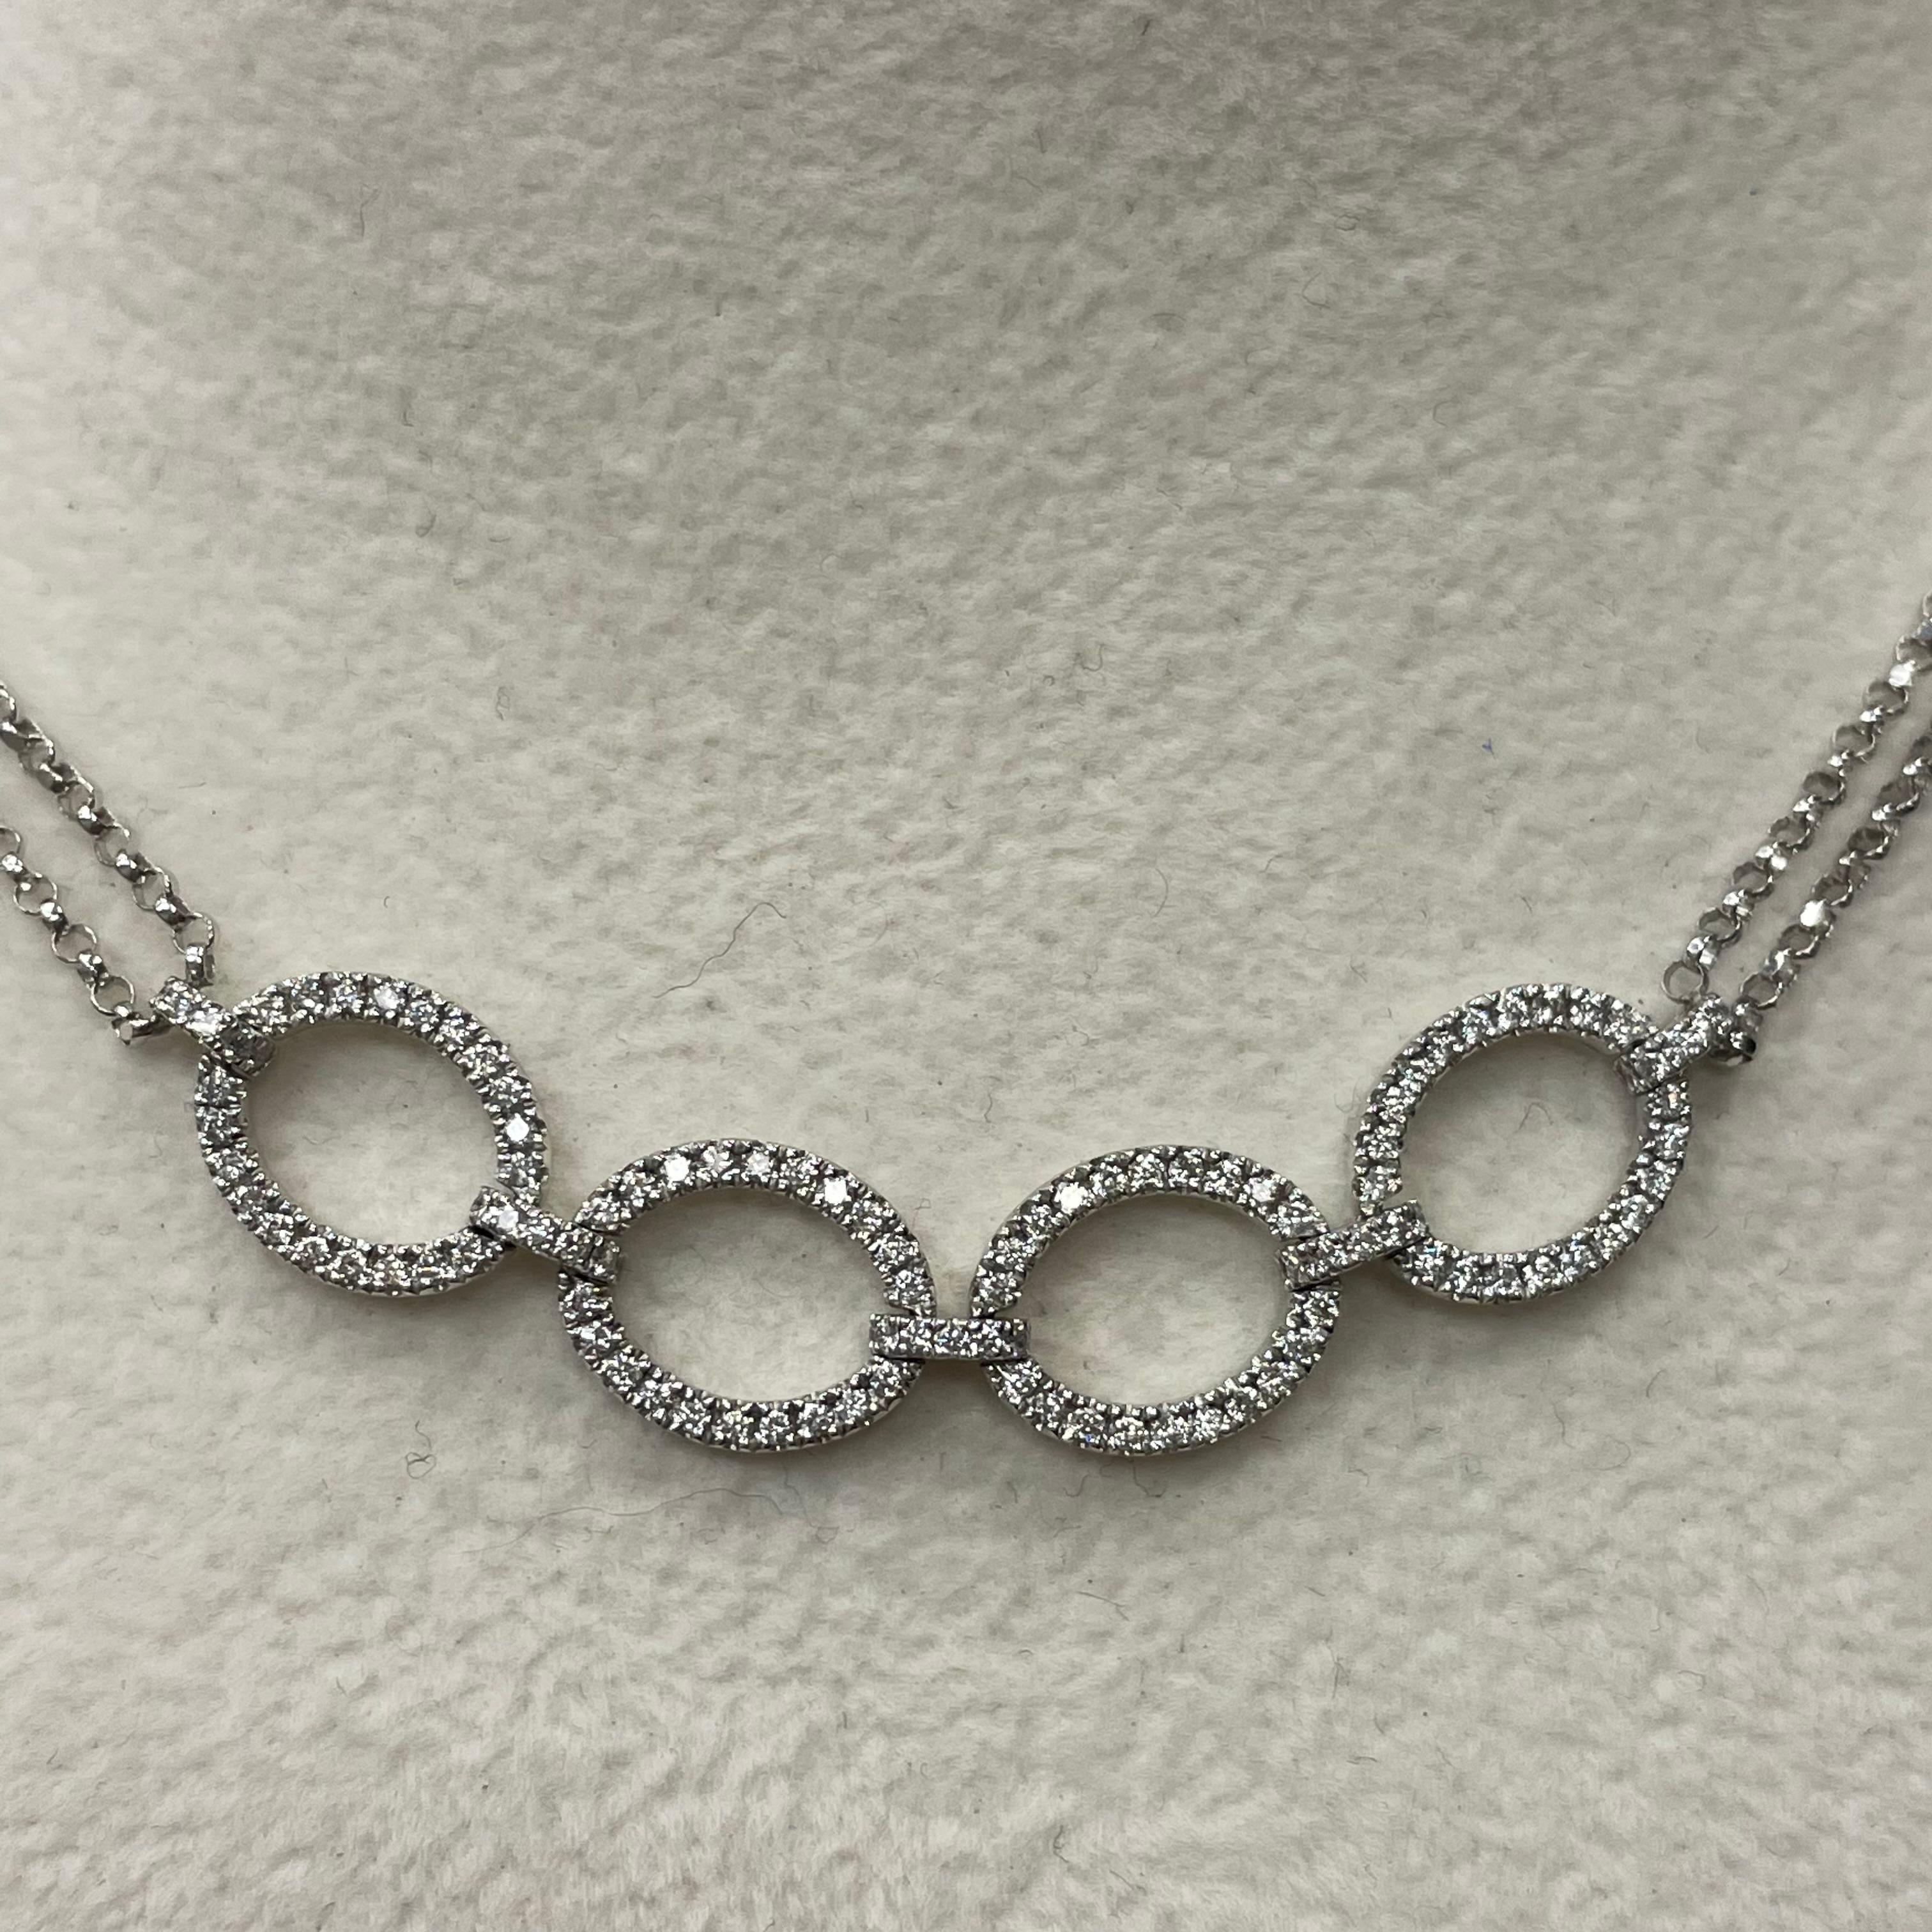 This beautiful diamond choker necklace is composed with two rows of chains . Totalling 113 pieces of brilliant-cut round diamonds, weighing 0.67 carats. Made in 18k white gold. It makes you impressive anytime any occasion.

